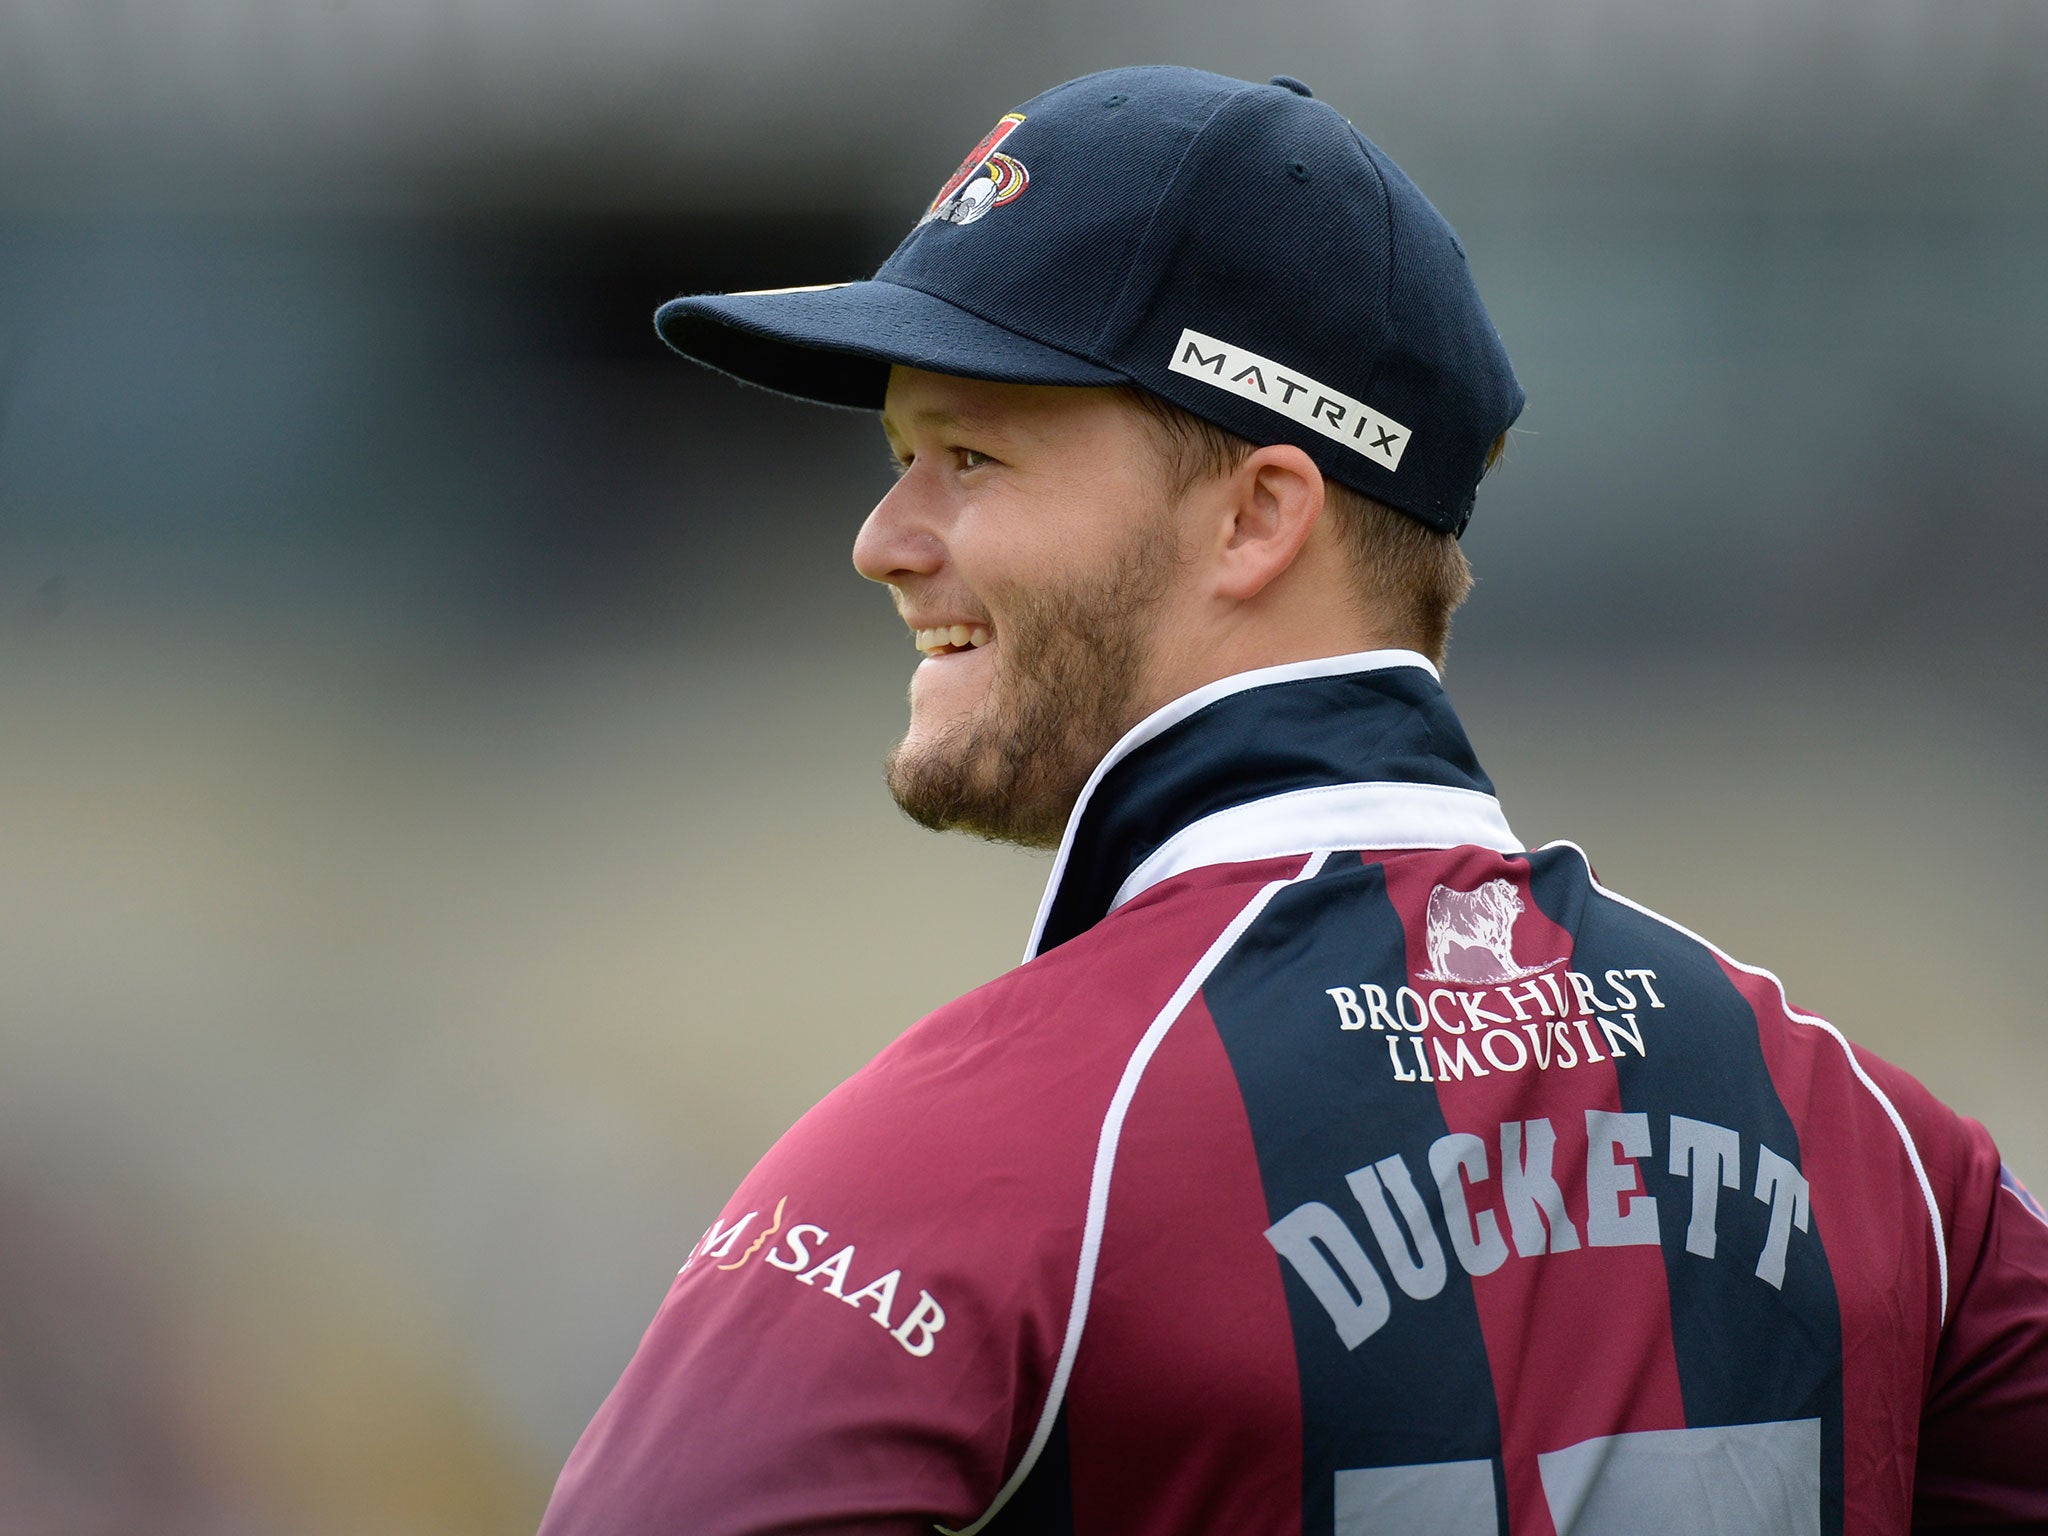 Ben Duckett has been in the runs this season and must be troubling the England selectors according to Nasser Hussain